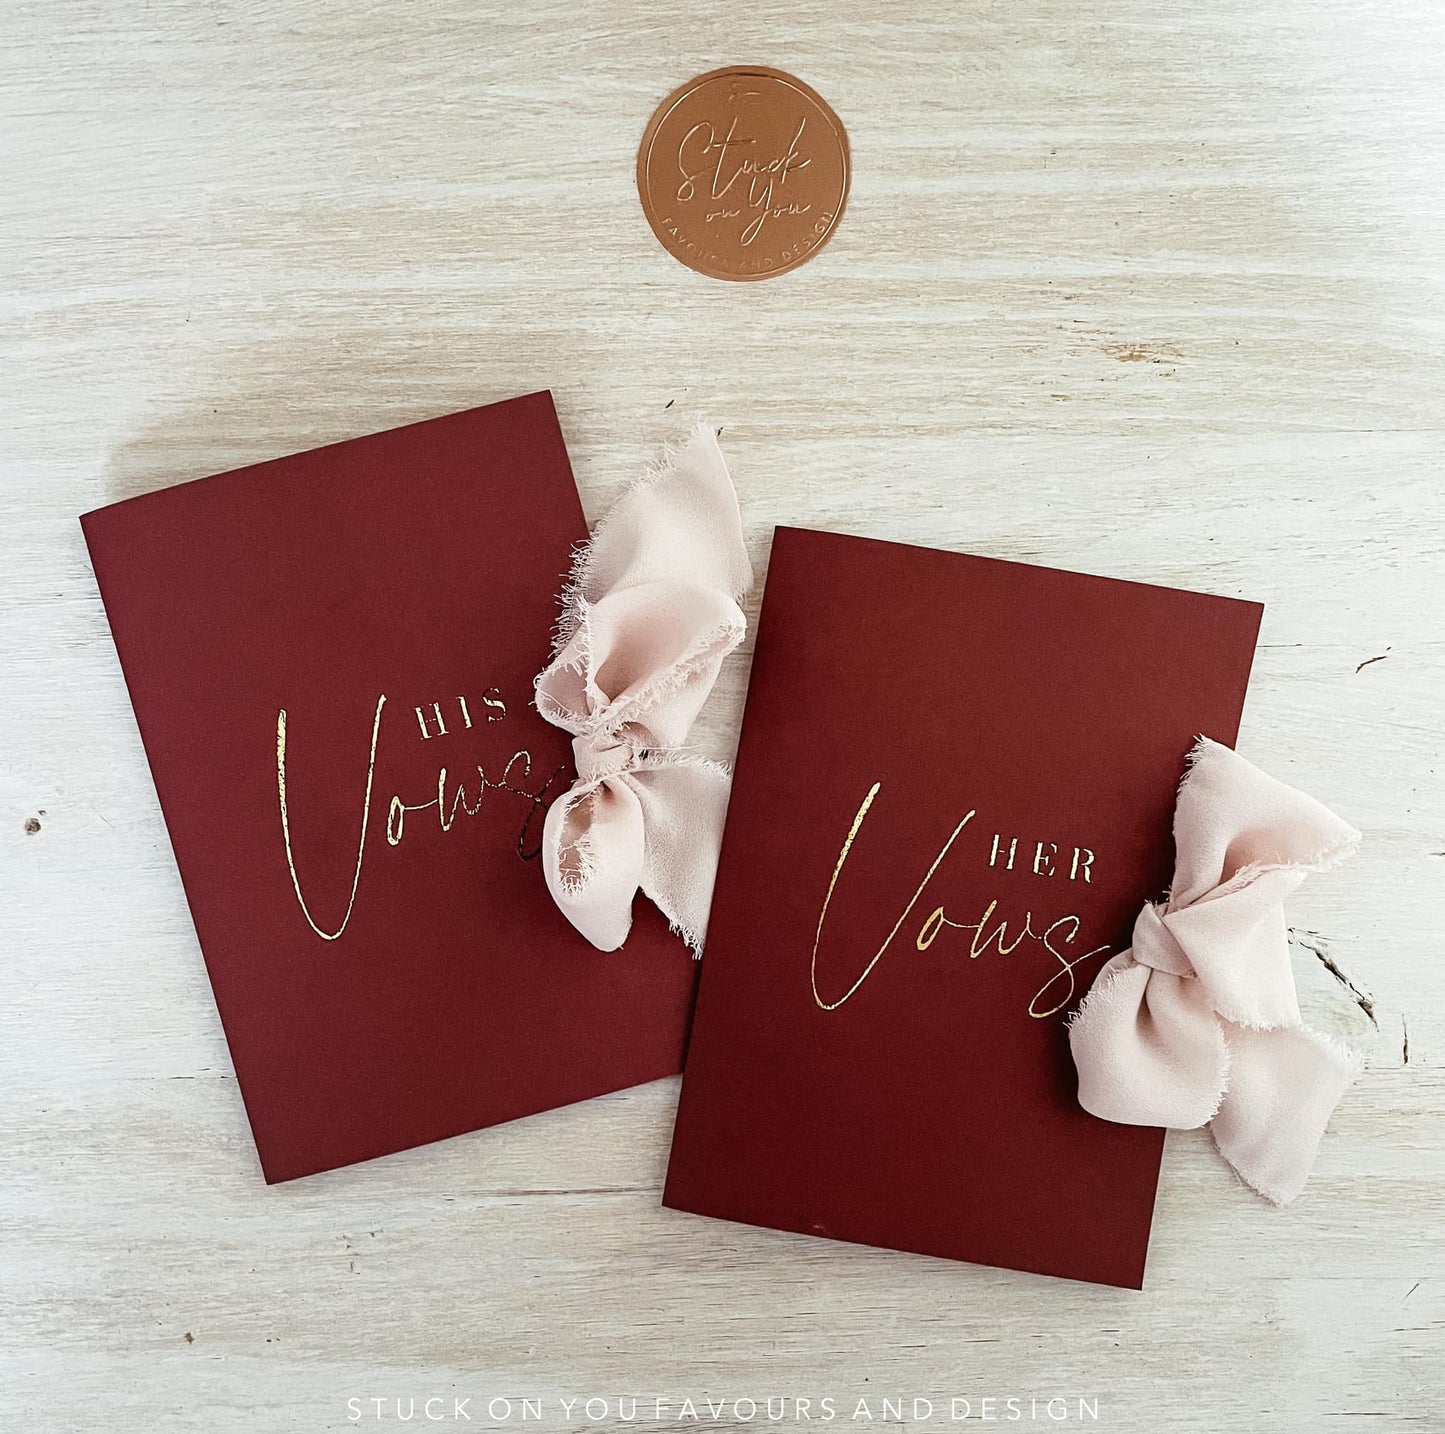 Chiffon Vow Cards